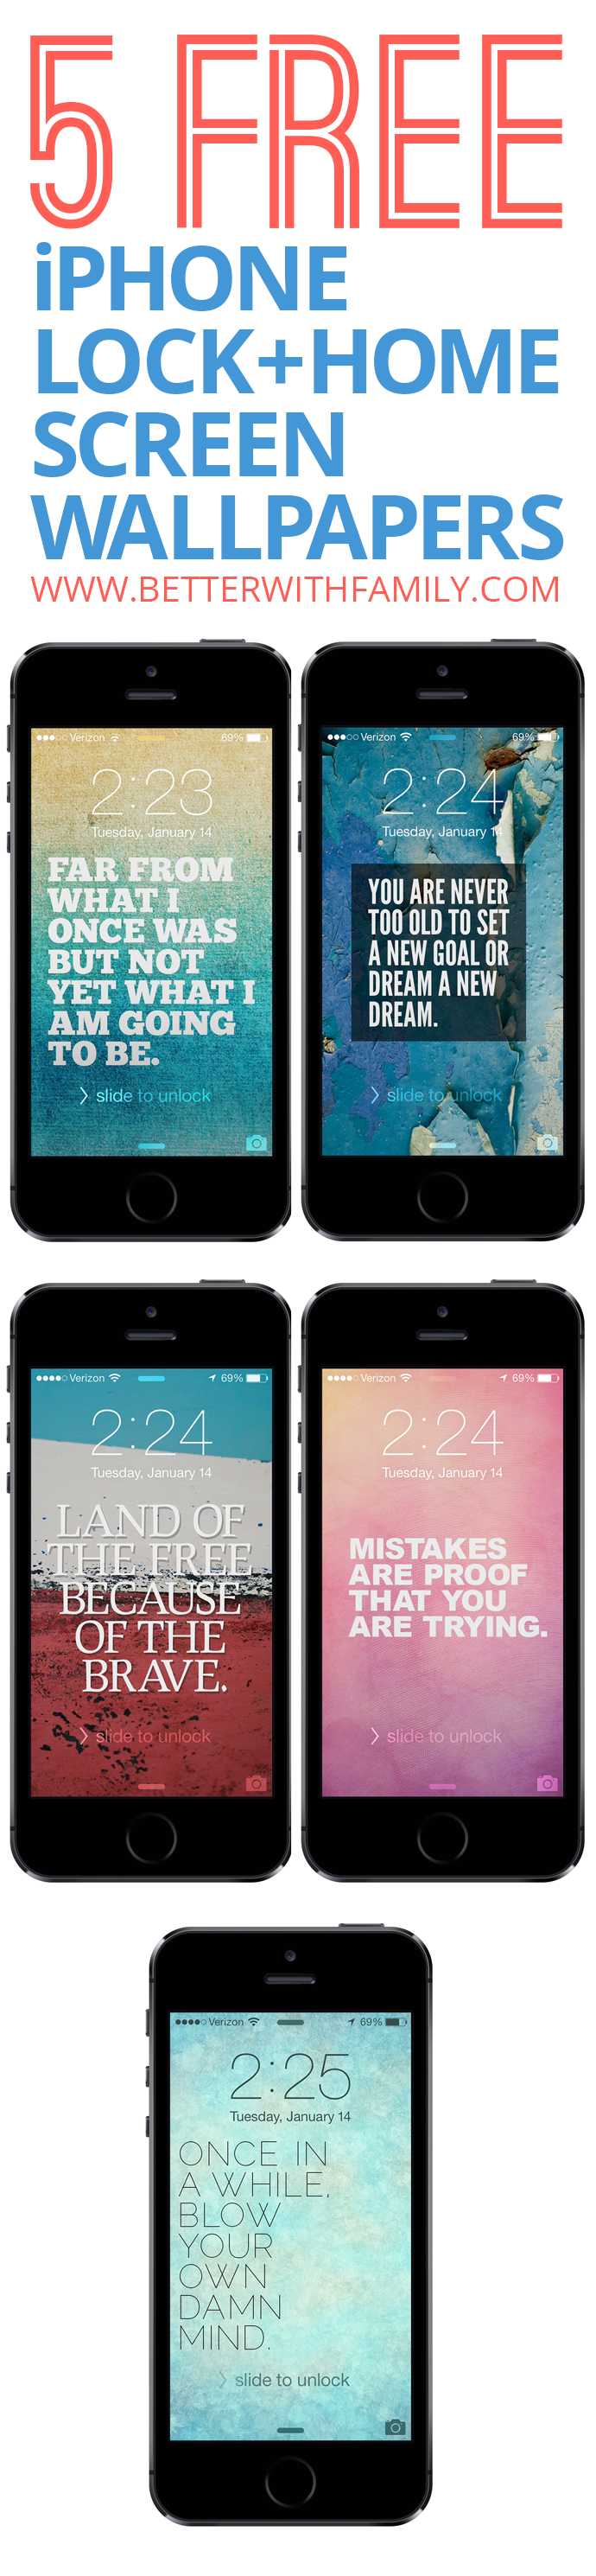 Free iPhone Lock and Home Screen Wallpapers   Better with Family